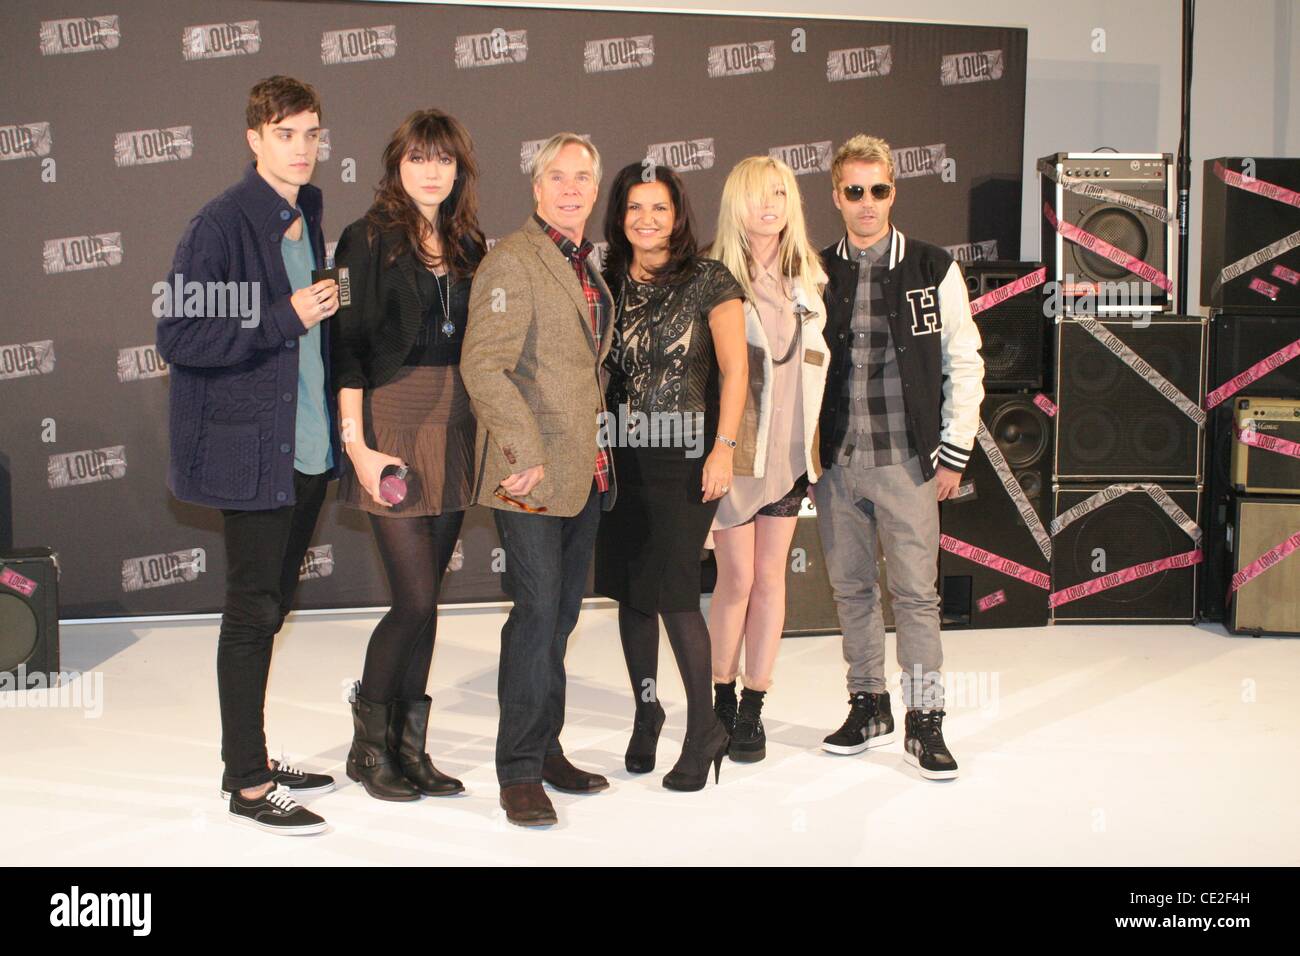 Josh Beech, Daisy Lowe, Tommy Hilfiger and The Ting Tings at the Stock  Photo - Alamy